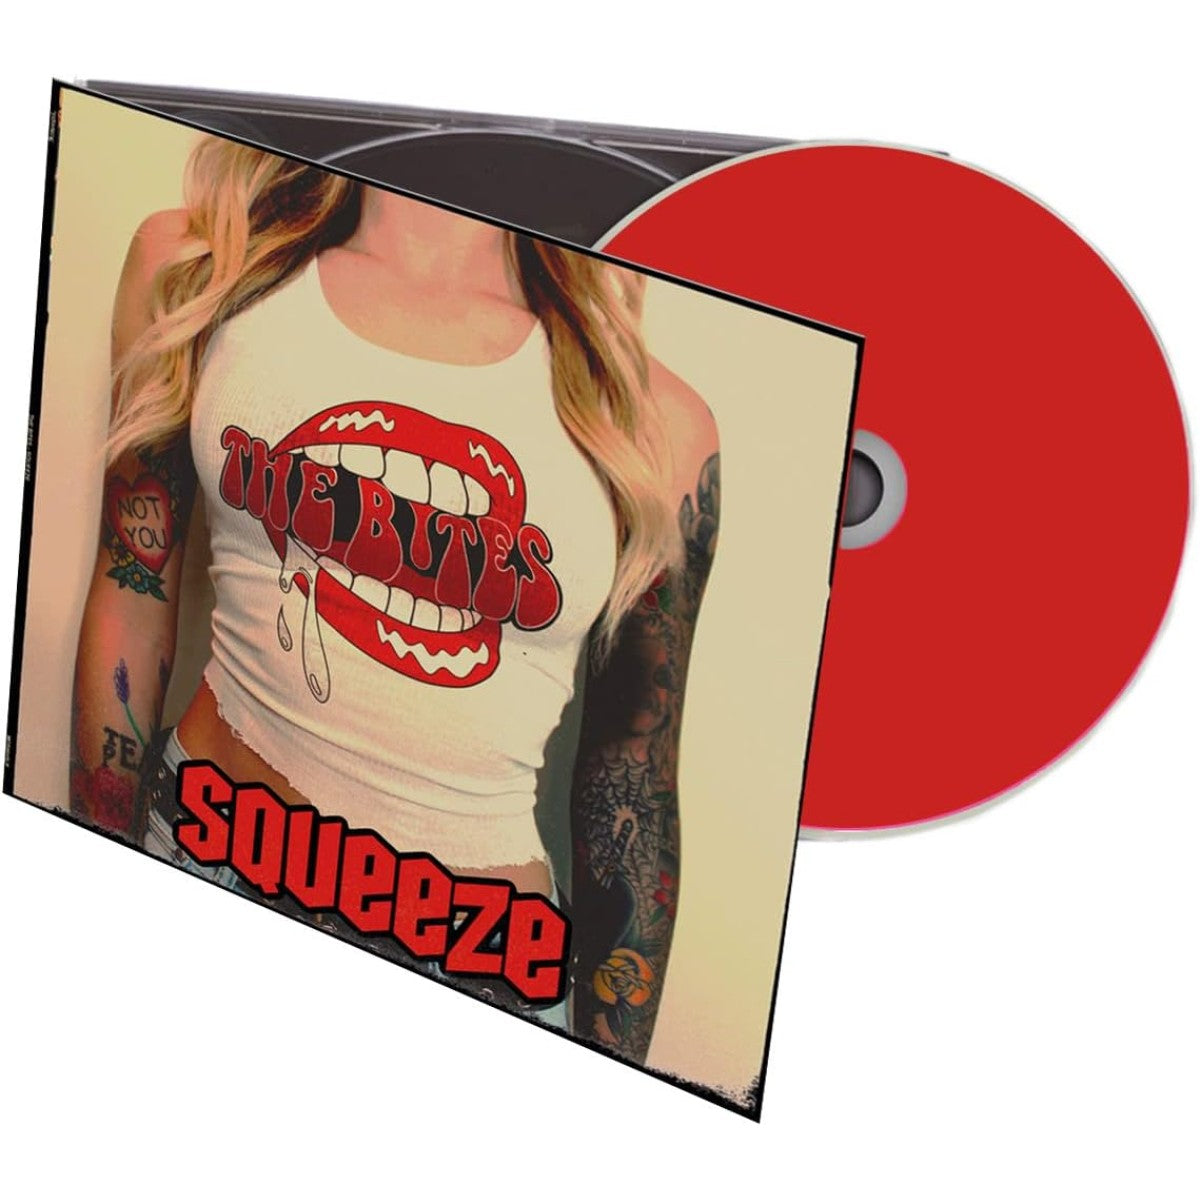 The Bites "Squeeze" CD